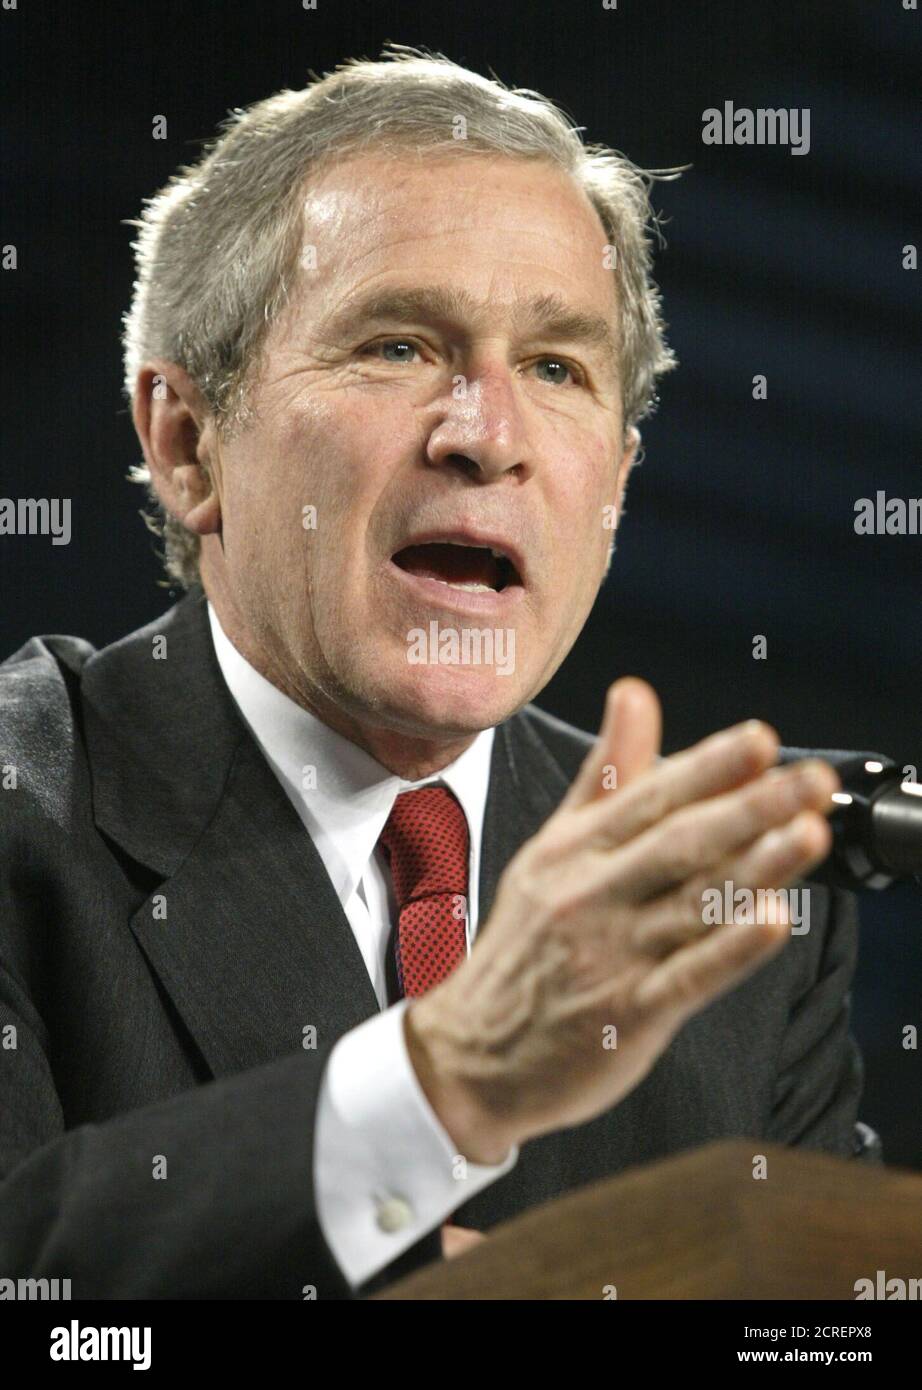 U.S. President George W. Bush speaks before signing a bill during a visit to Conshohocken, Pennsylvania, January 11, 2002. Bush traveled to Pennsylvania to sign the Small Business Liability Relief and Brownfields Revitalization Act, a five-year plan to provide up to $200 million annually to states, local governments and Indian tribes to clean up polluted sites, known as brownfields. REUTERS/Kevin Lamarque  KL/HB Stock Photo